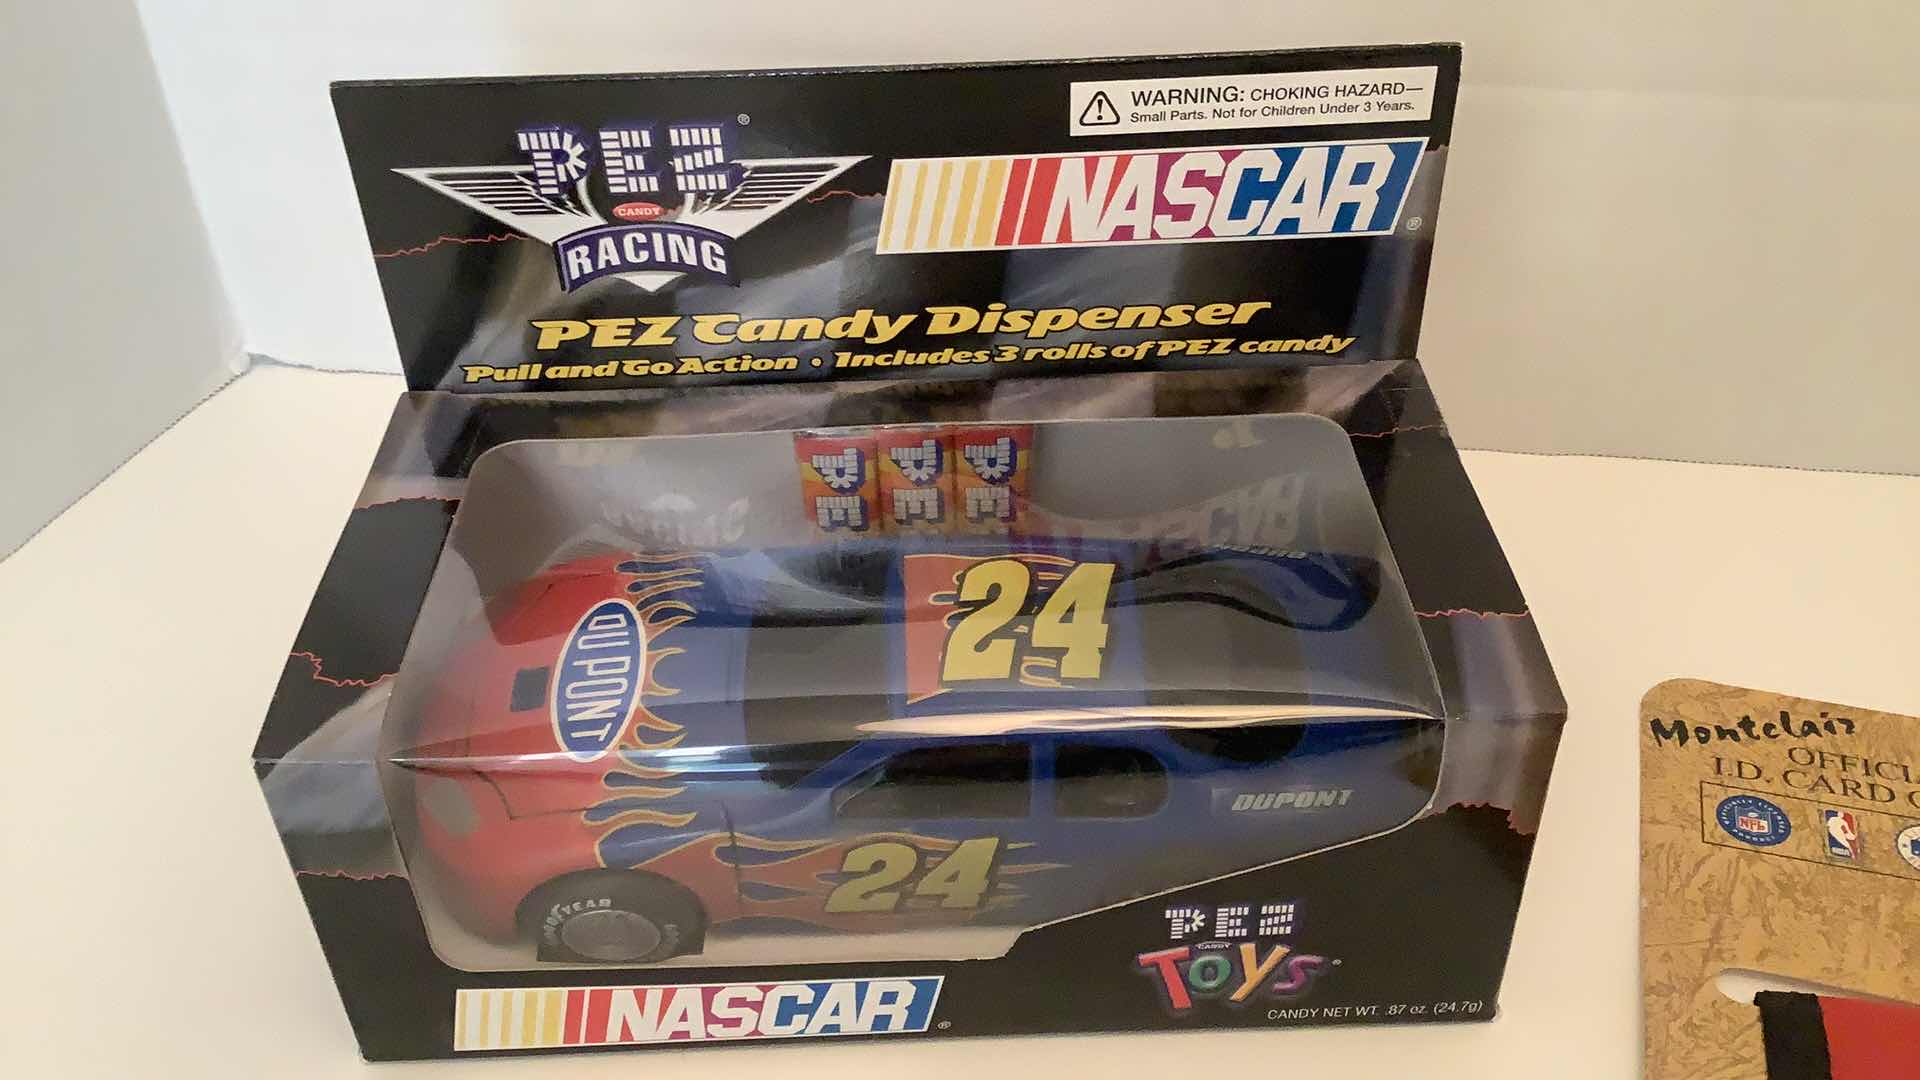 Photo 3 of NASCAR #24 PEZ CANDY DISPENSER AND CARD CASE